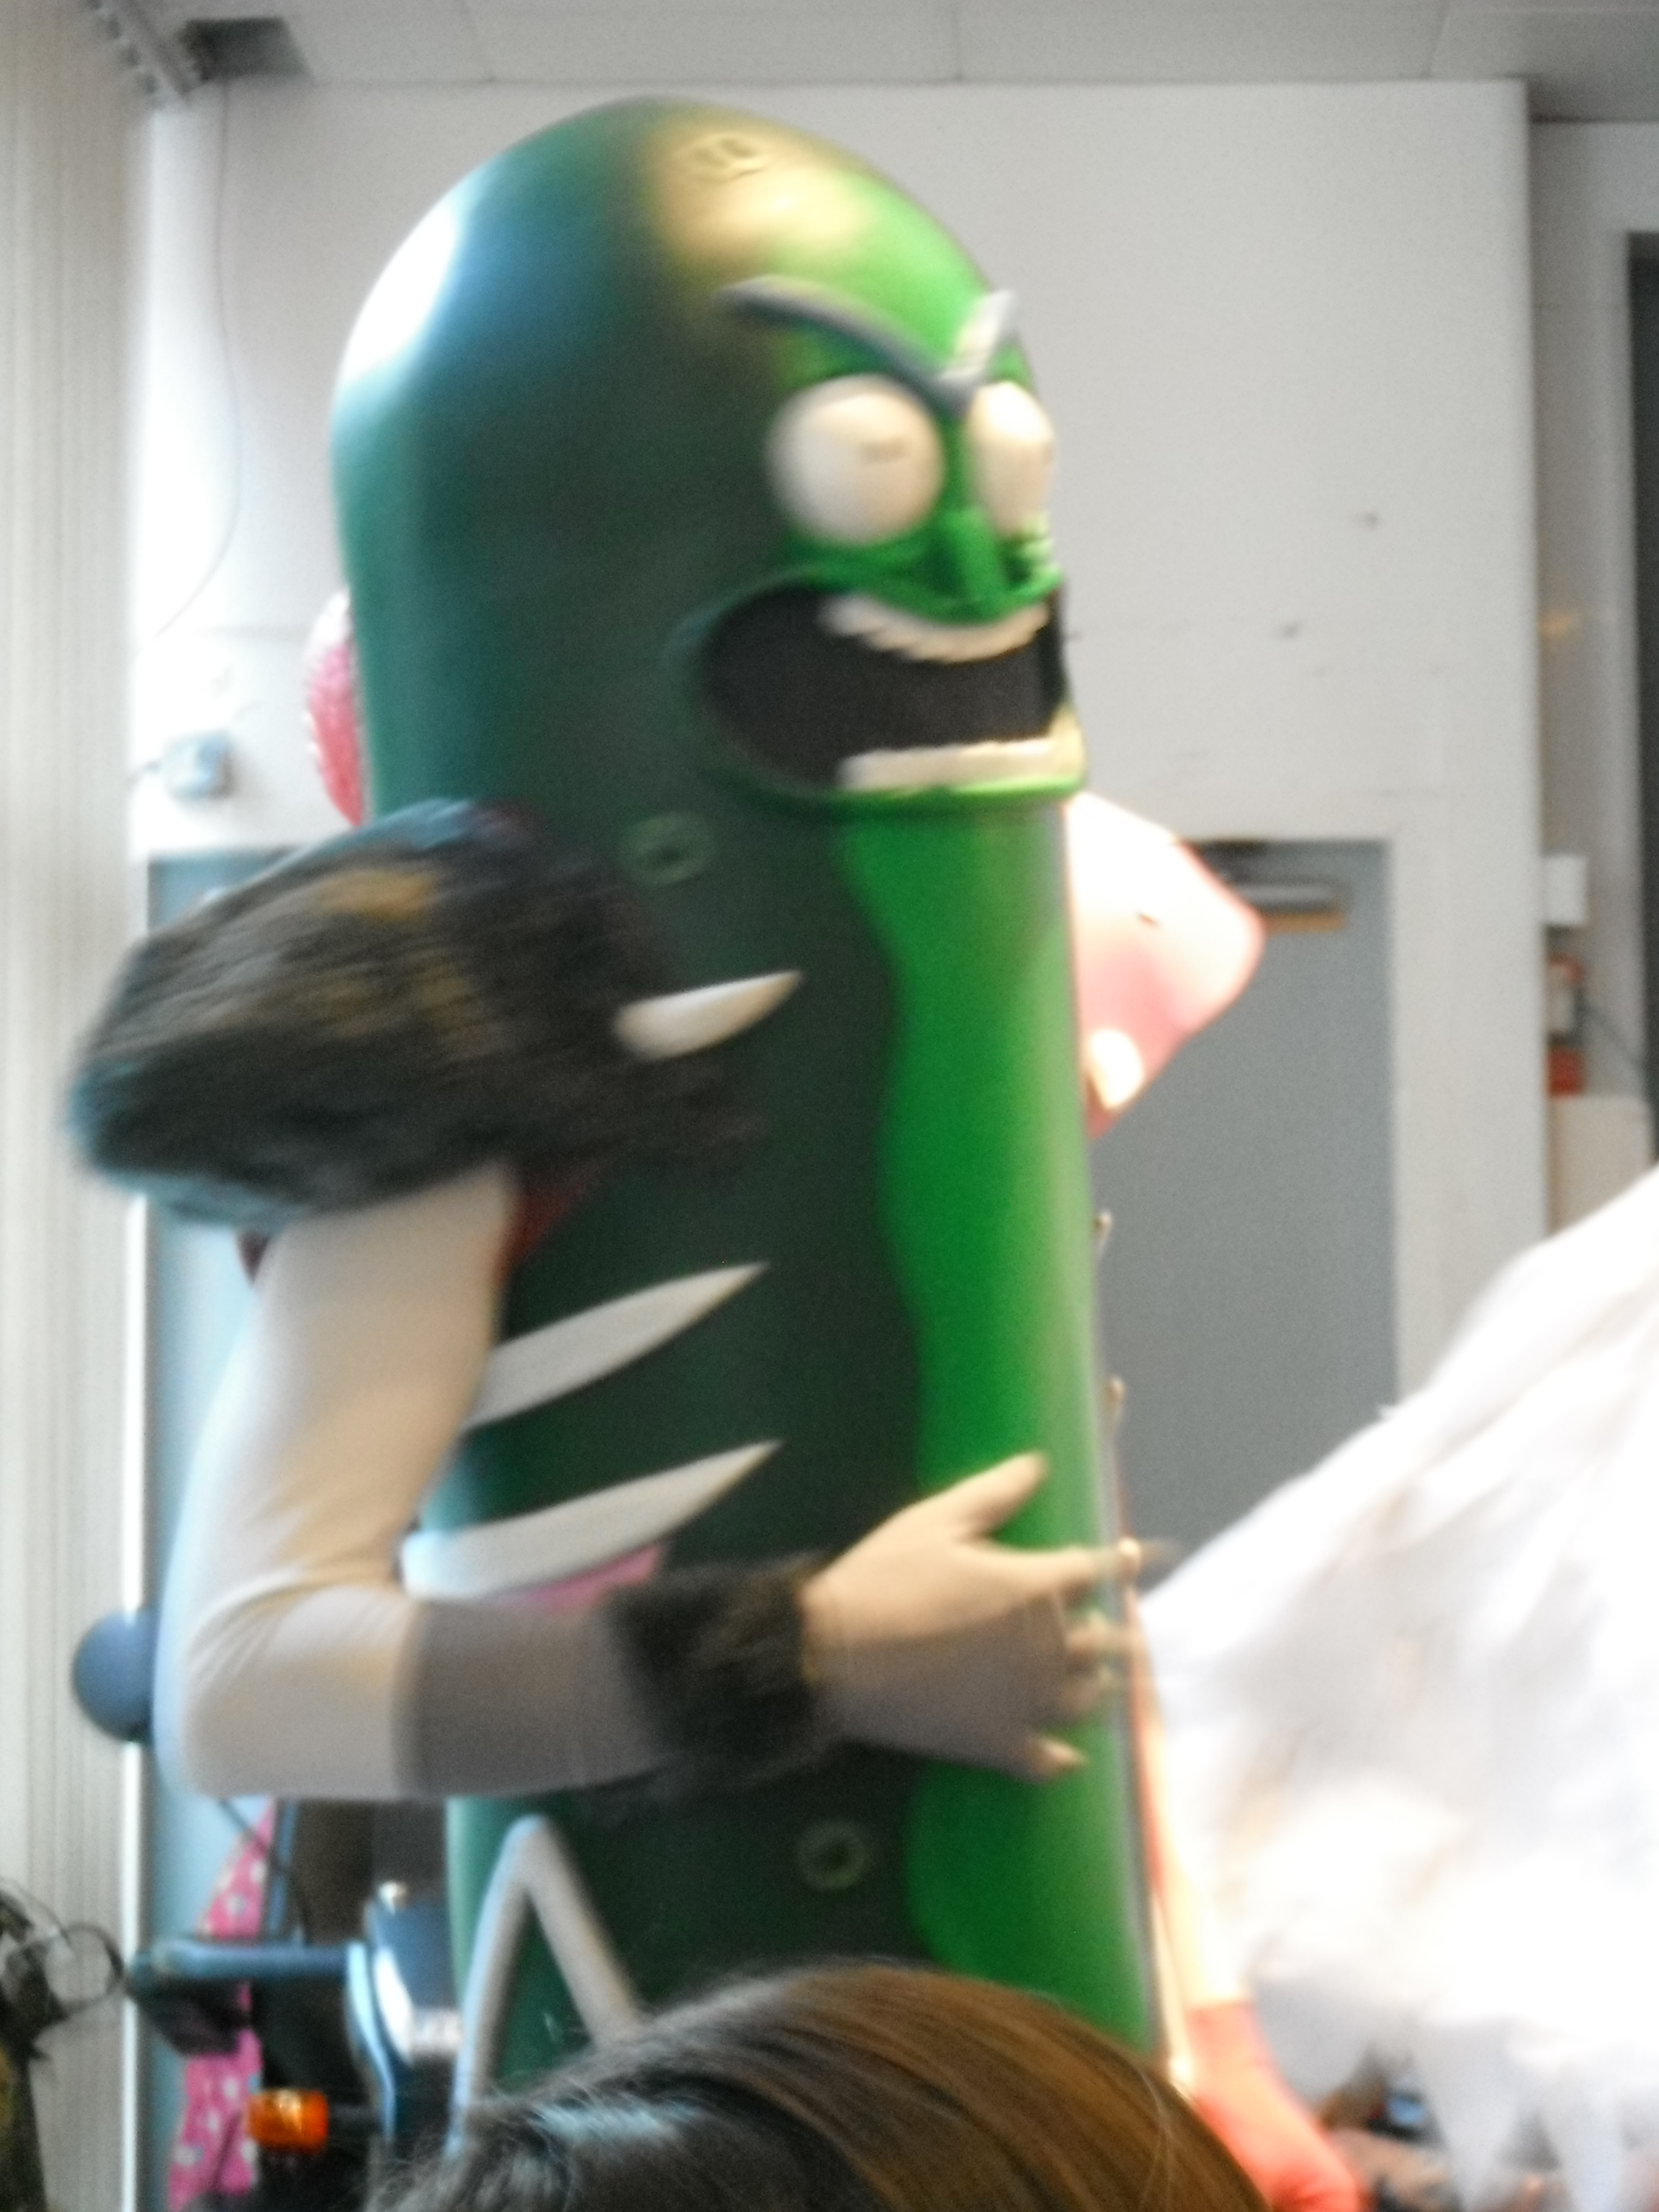 Photo taken by me – Pickled Pete – one of the prize winning costumes at this year’s Preston Comic Con.